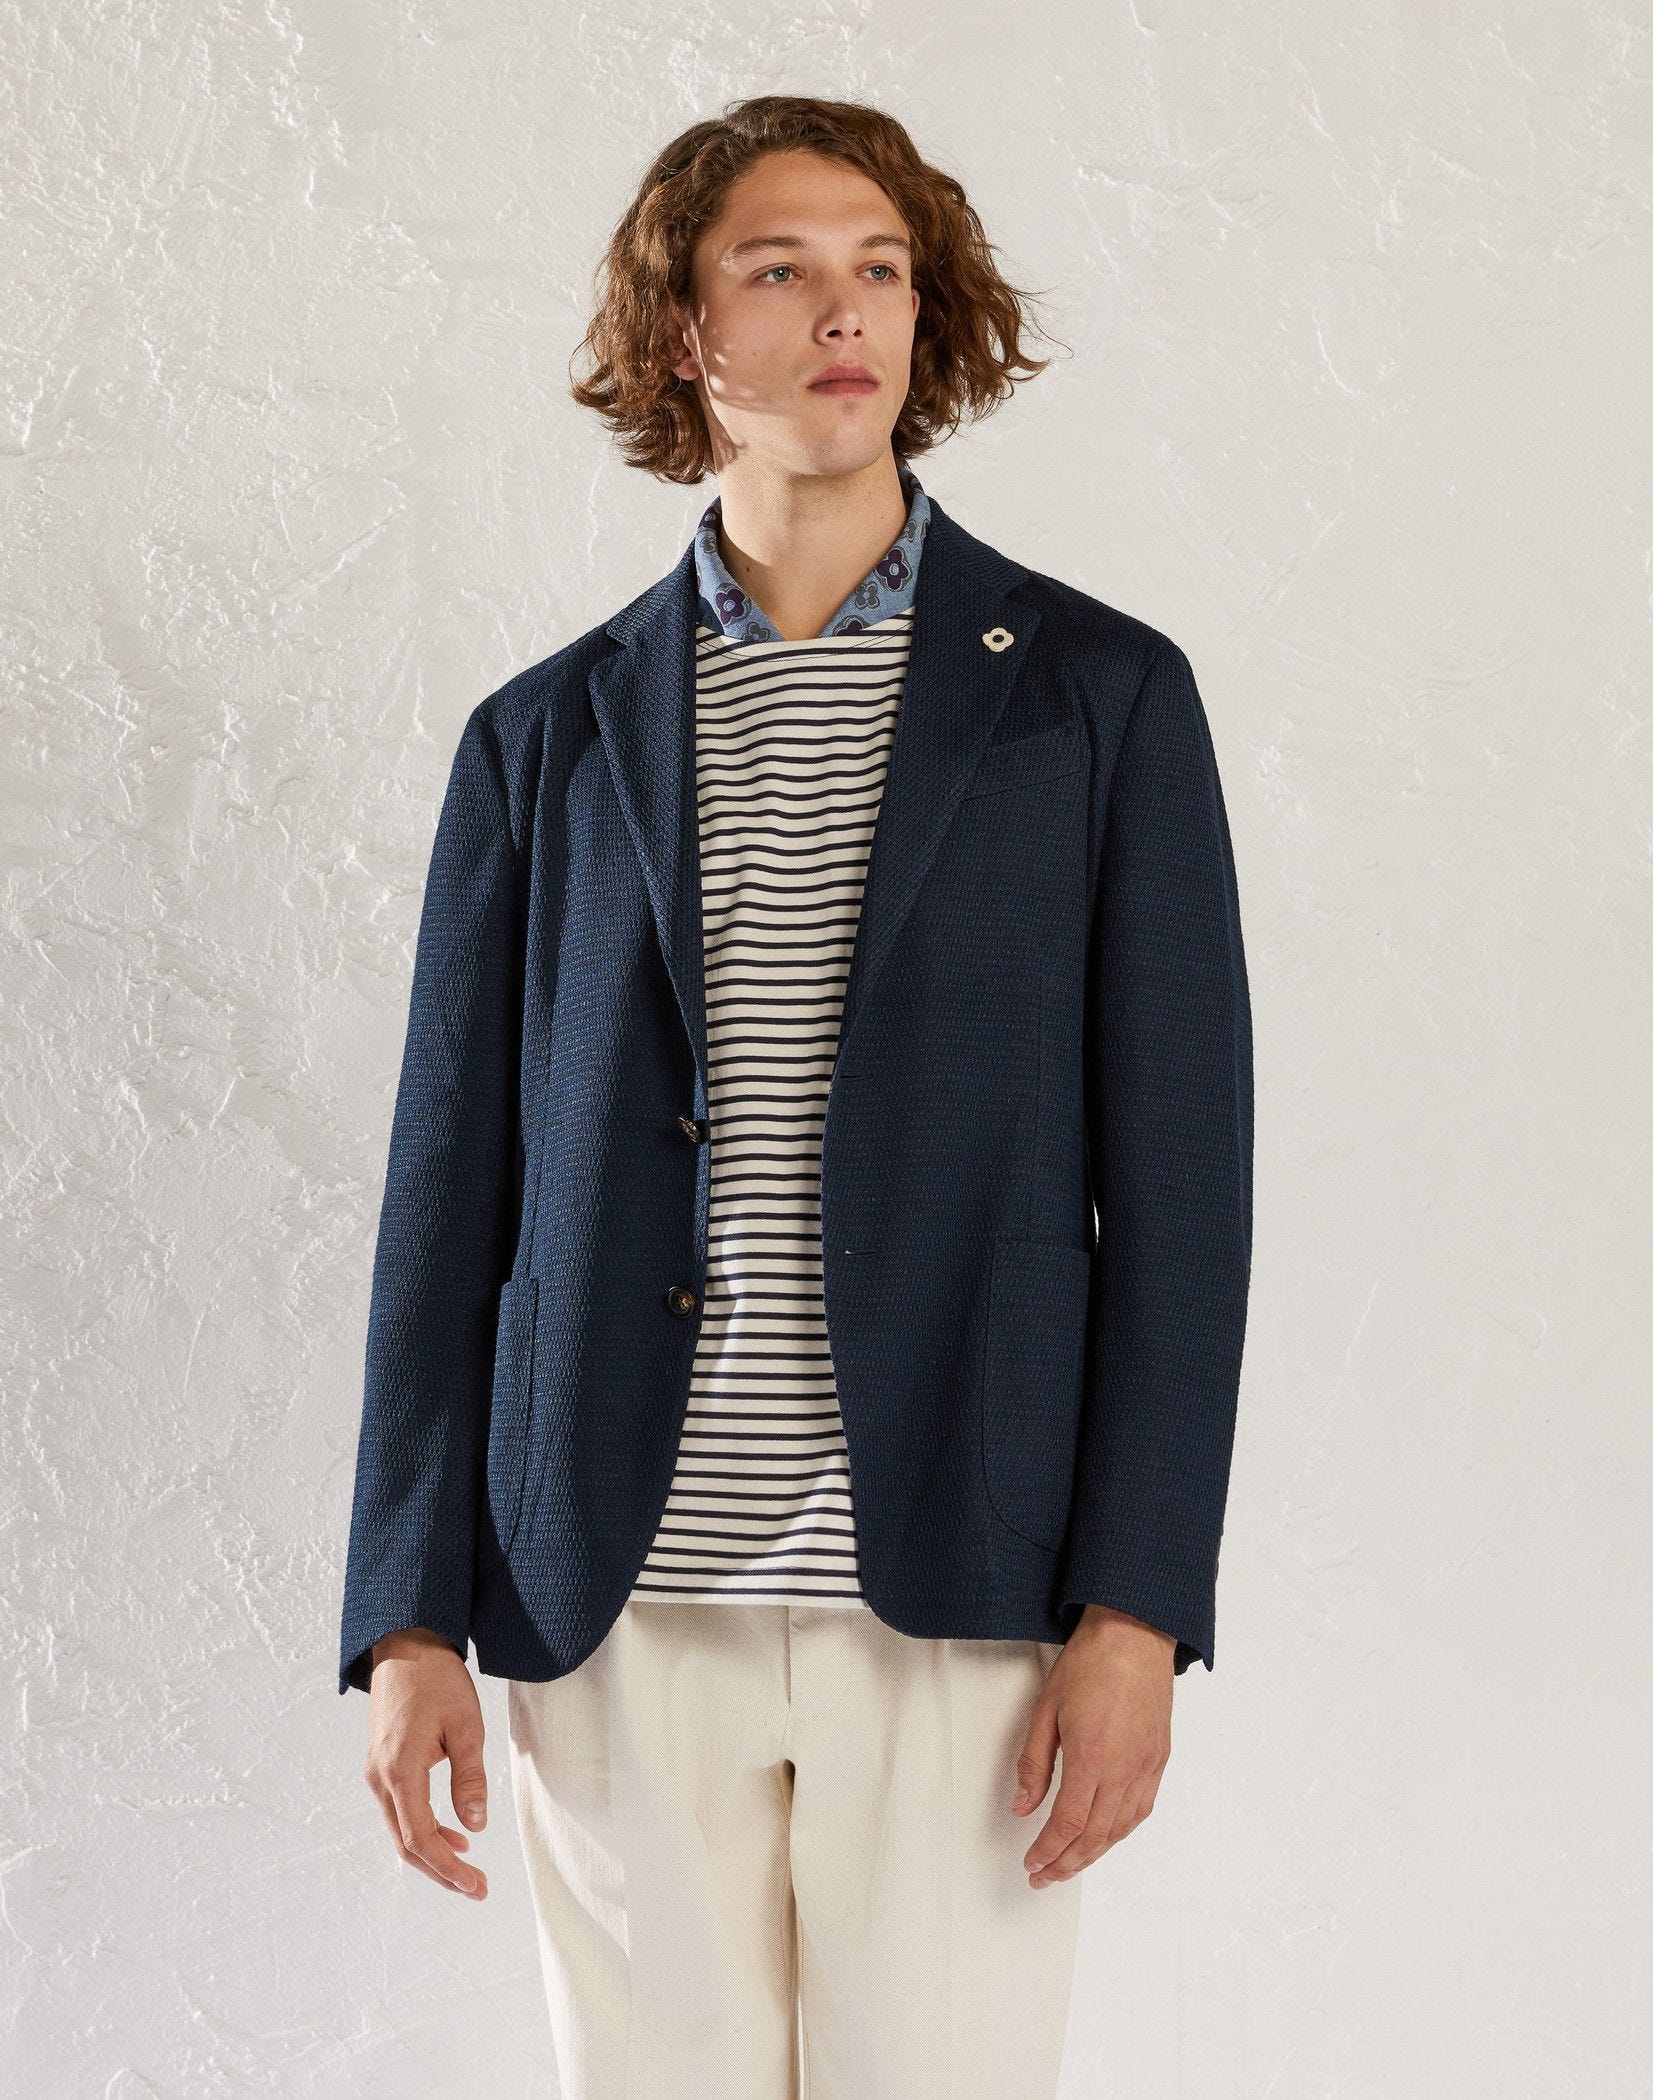 Blue linen and polyester jacket - Liknit